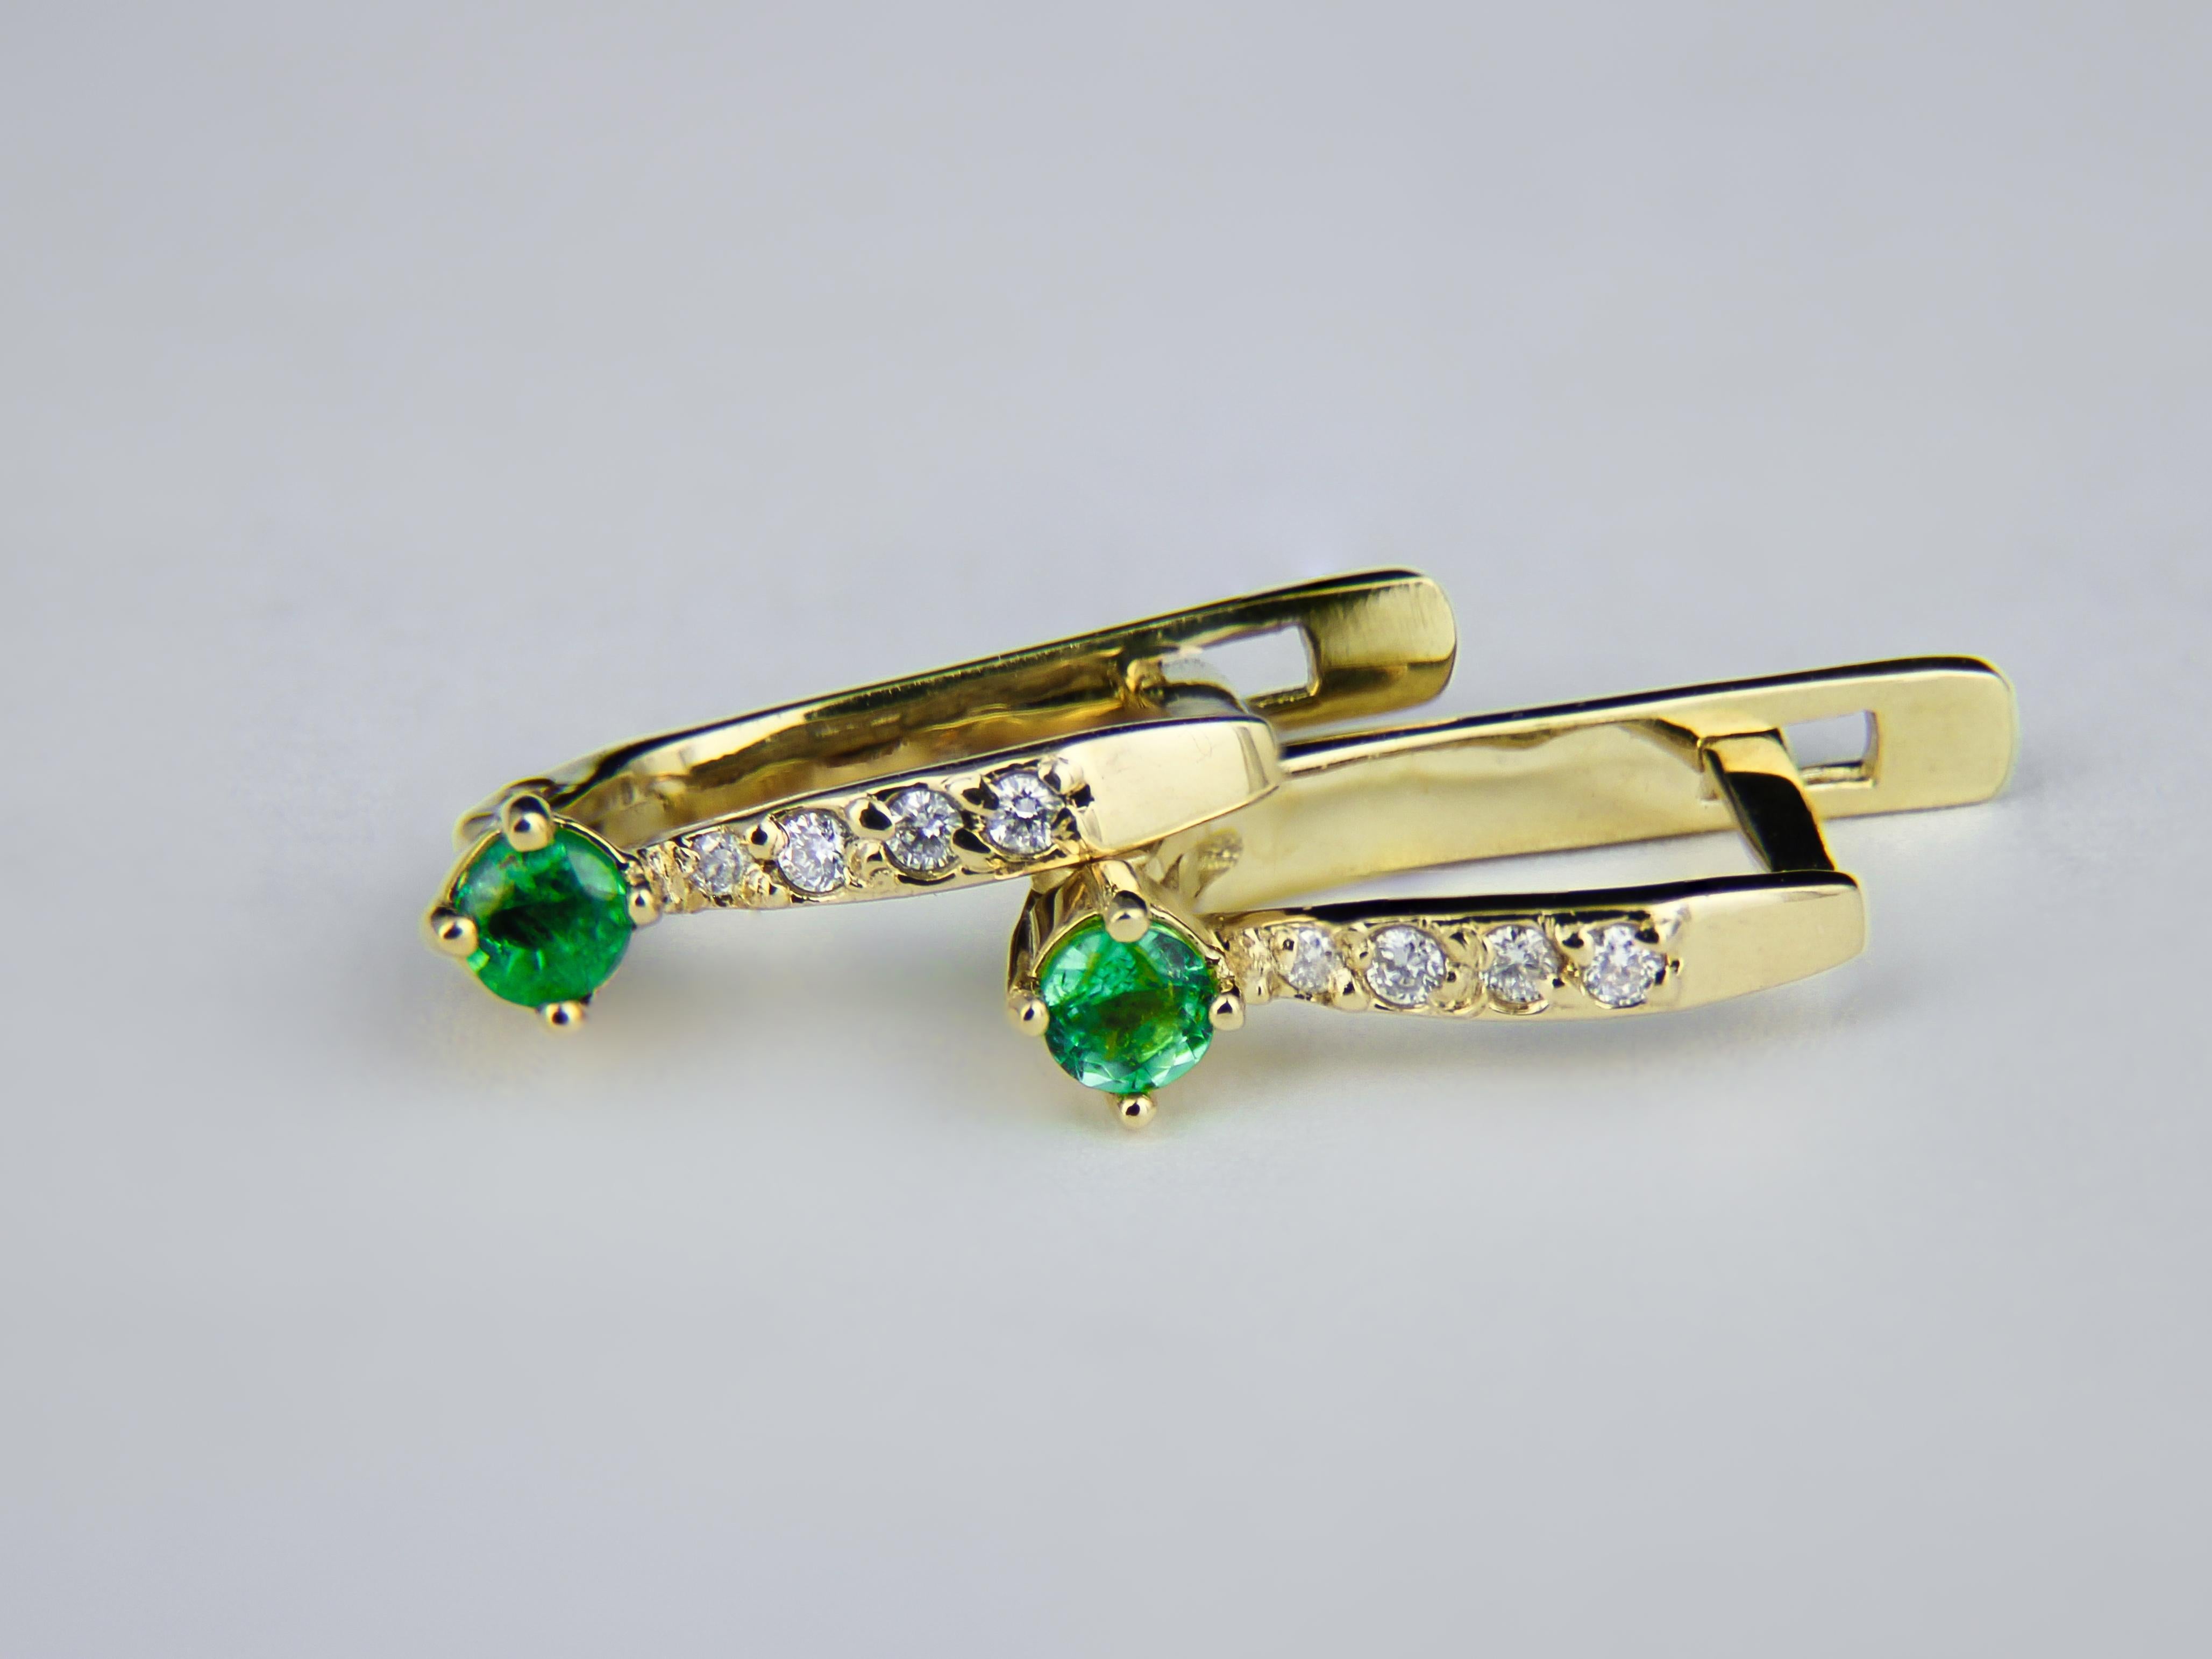 Emerald gold earrings. 

Tiny emerald earrings. Gold earrings for girl. Delicate emerald earrings. 14k Gold Earrings With Emeralds, Diamonds.

Total weight: 2 g.
Gold -14k gold
Size: 16.4 x 3.65 mm.

Central stones: Emeralds
Cut: Round
Total weight: